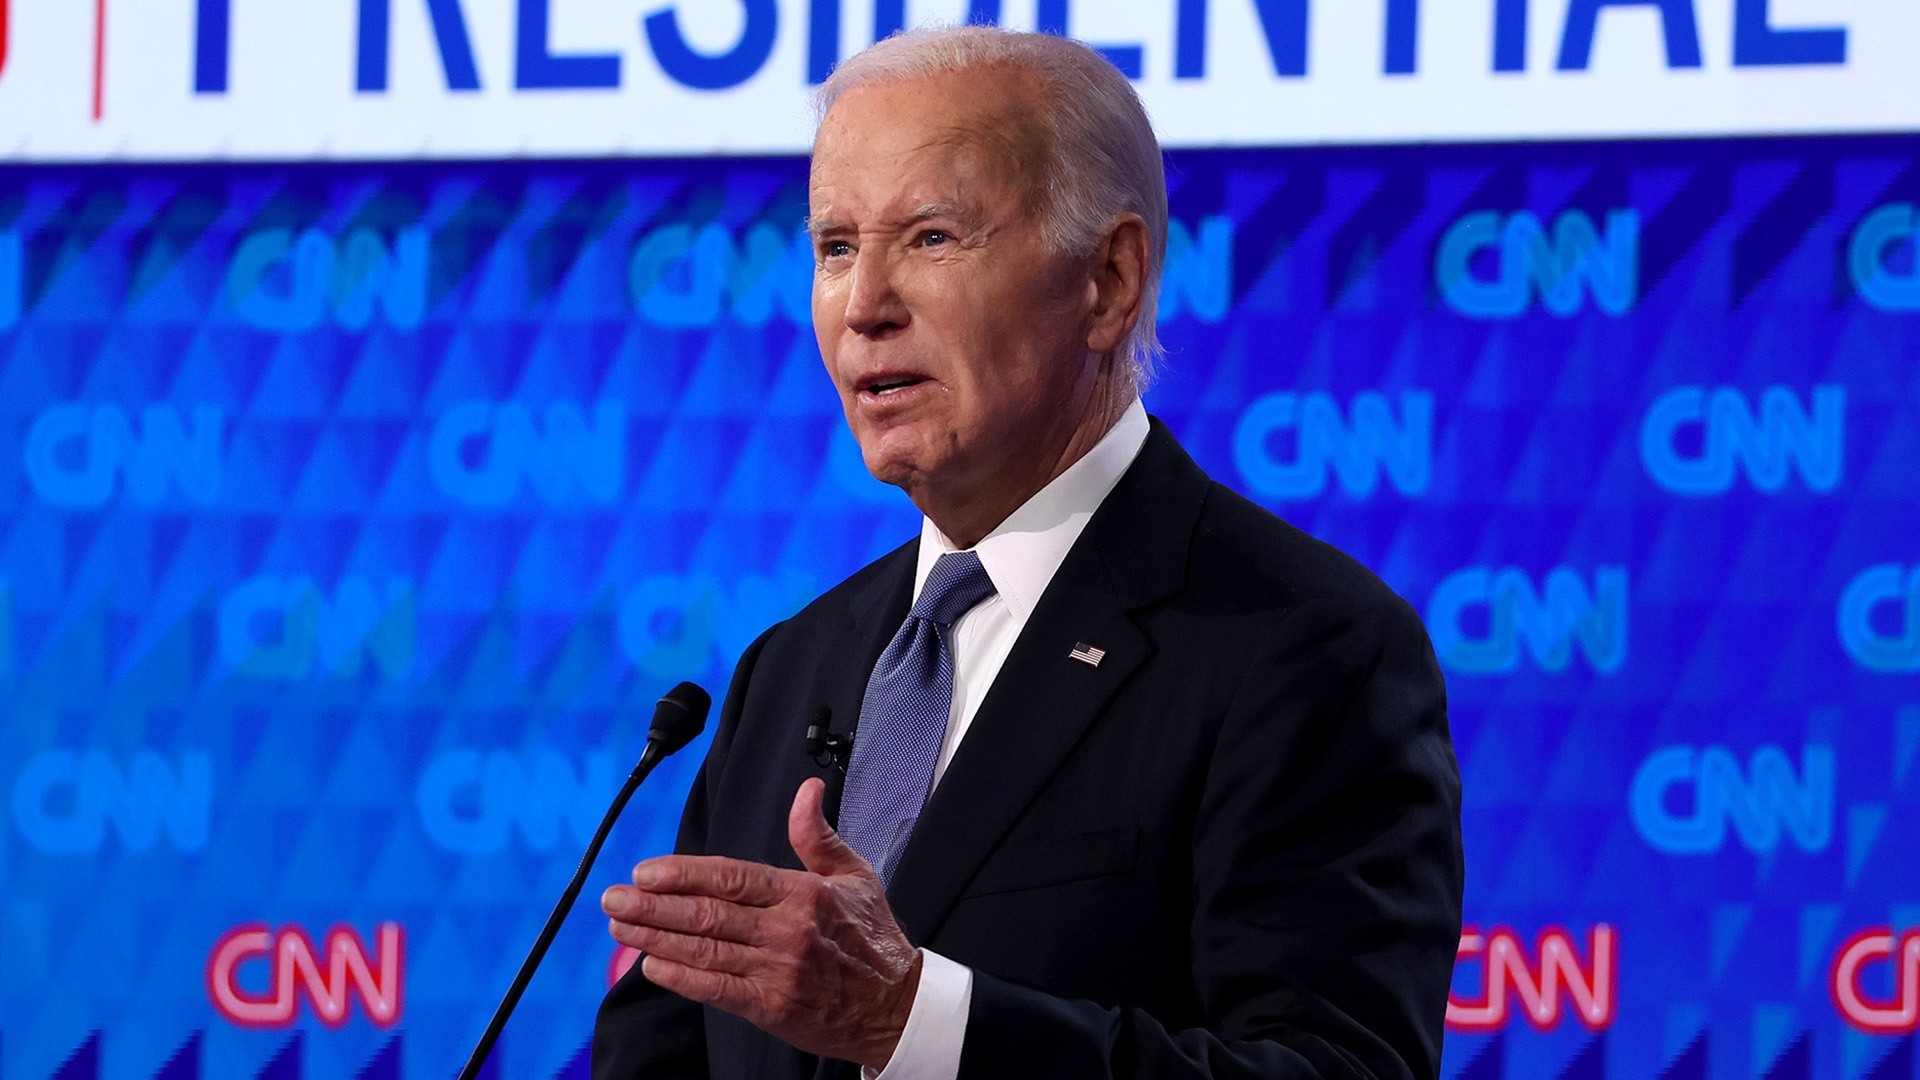 Some Democrats call for Biden to step aside after first debate